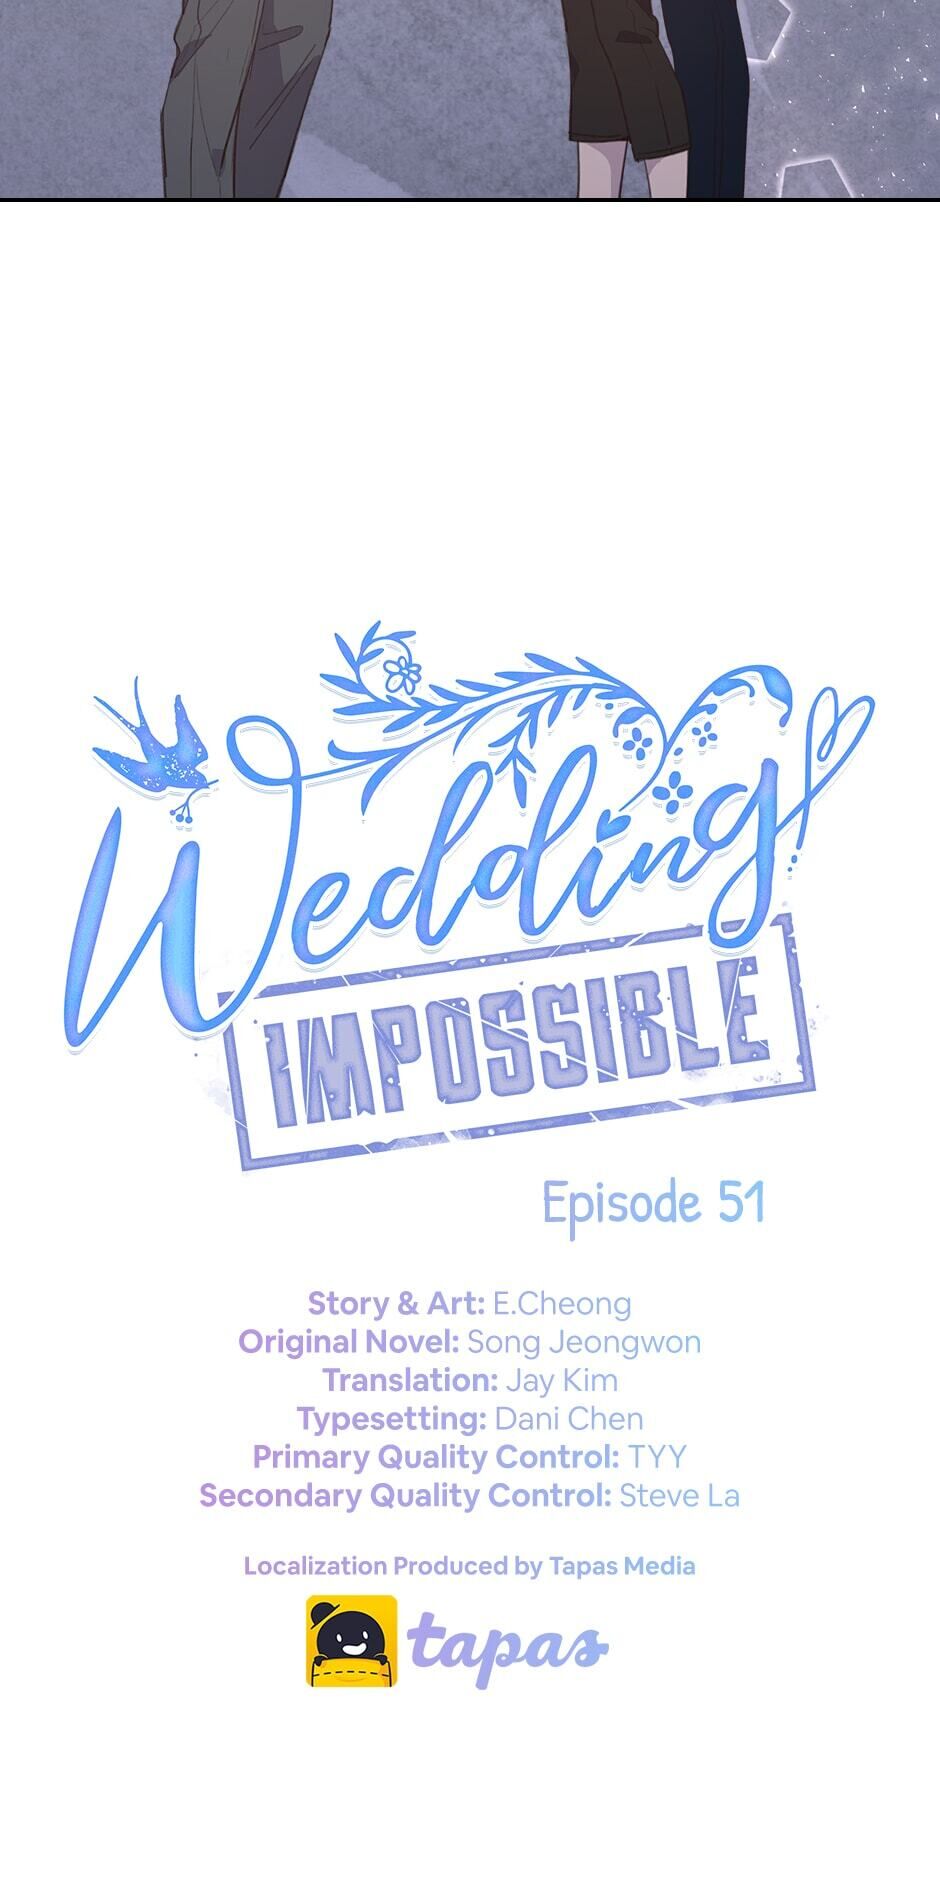 Wedding Impossible - Page 2